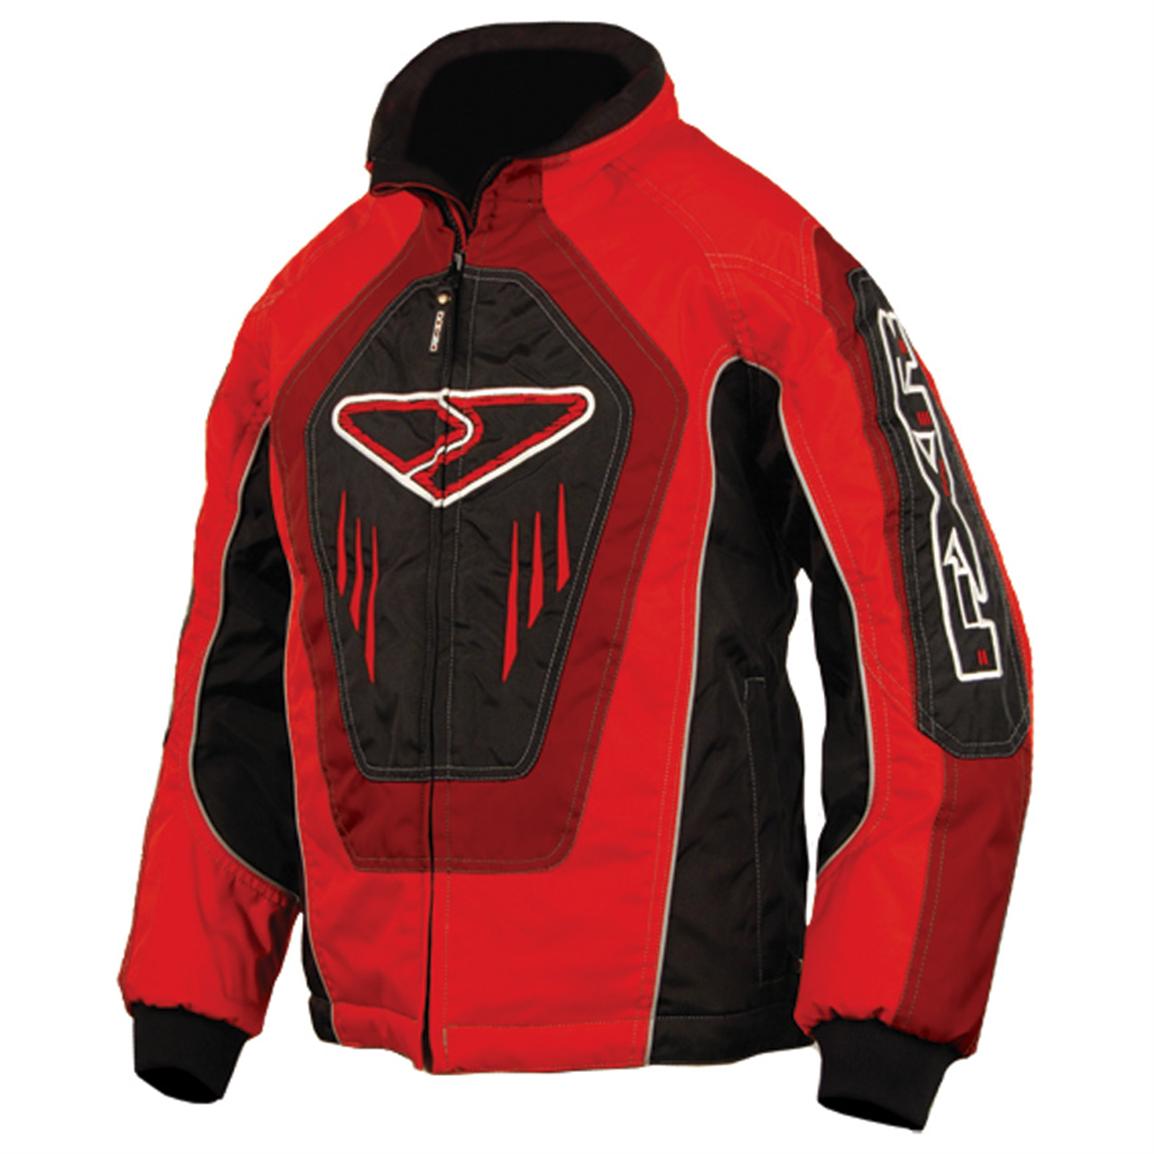 Youth FXR® Cold Cross Jacket - 131278, Snowmobile Clothing at Sportsman ...